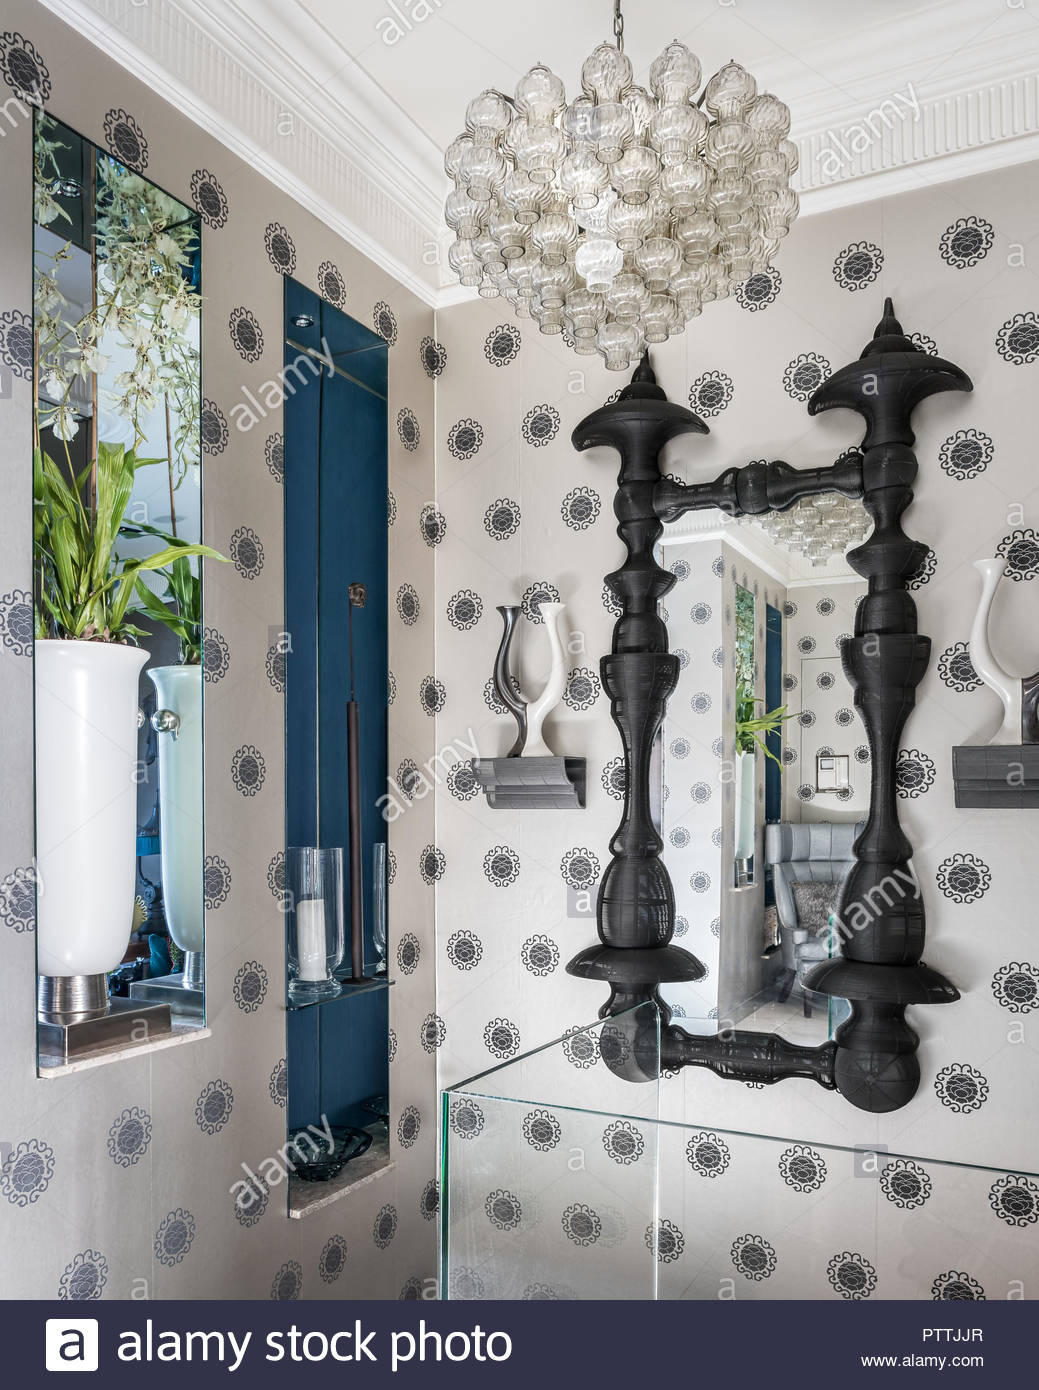 Black Mirror Frame And Patterned Wallpaper With Pendant